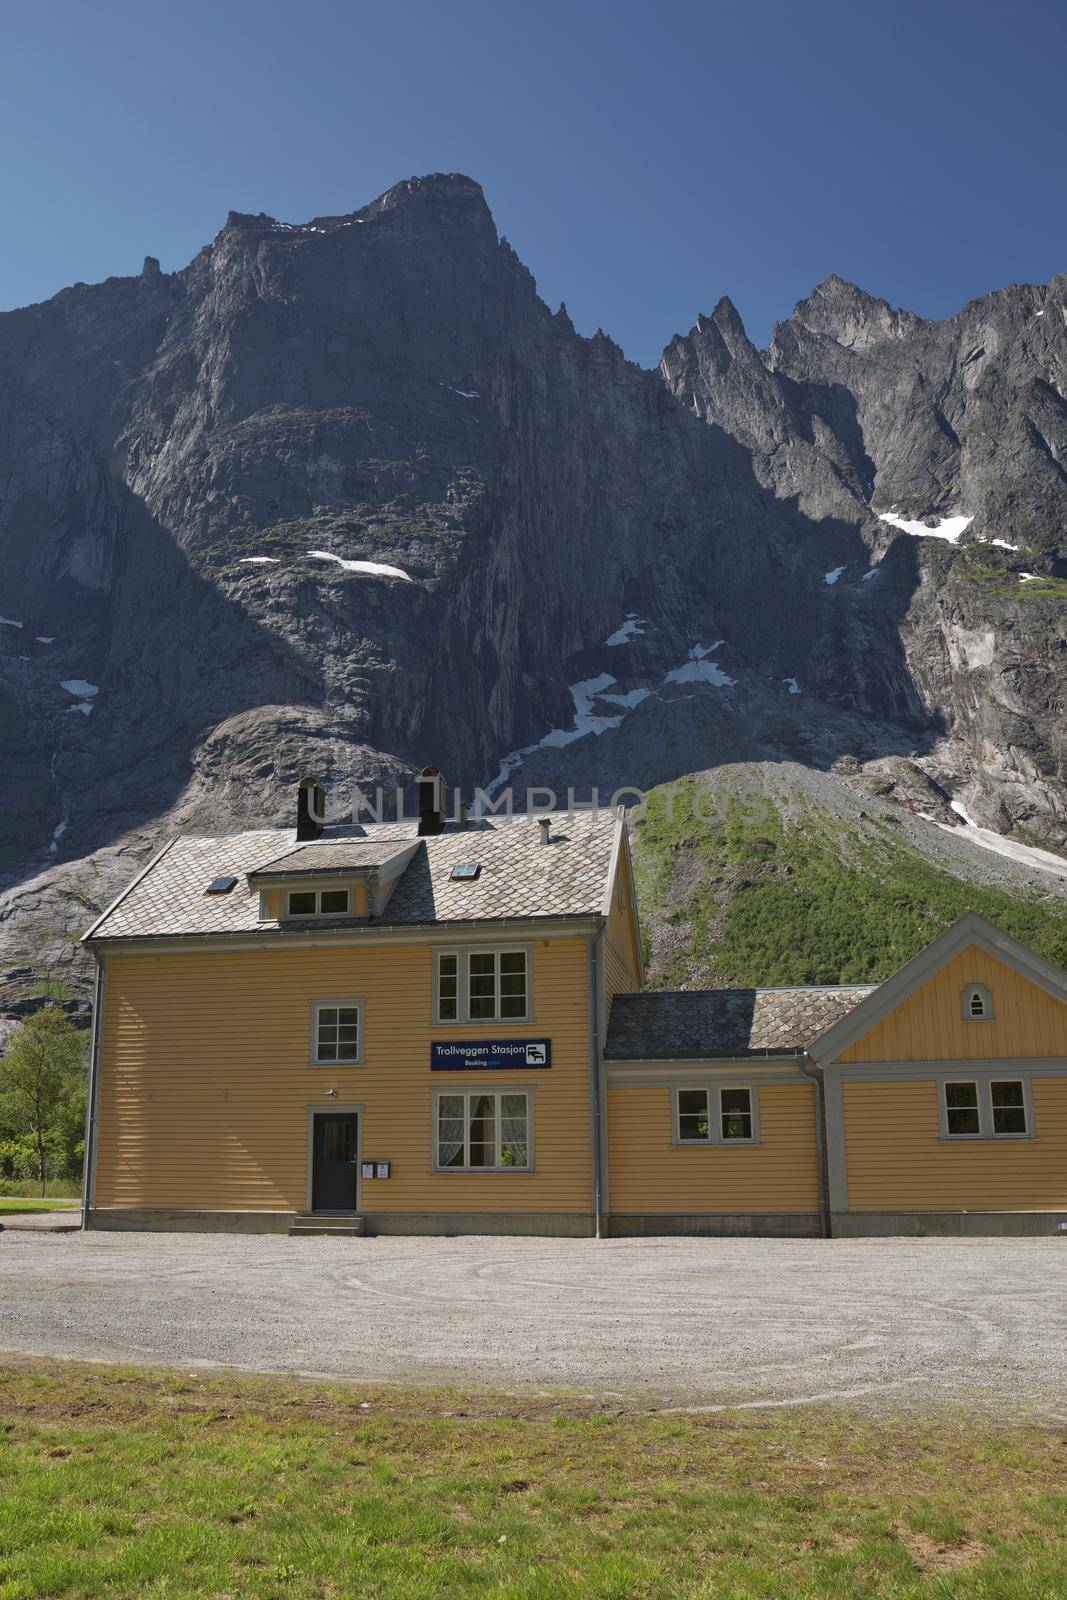 Rauma Railway Station, an historic wooden building, on the famous scenic railway, below the Troll Wall, a steep vertical rock face, Rauma Municipality, More Og Romsdal, Norway by wondry